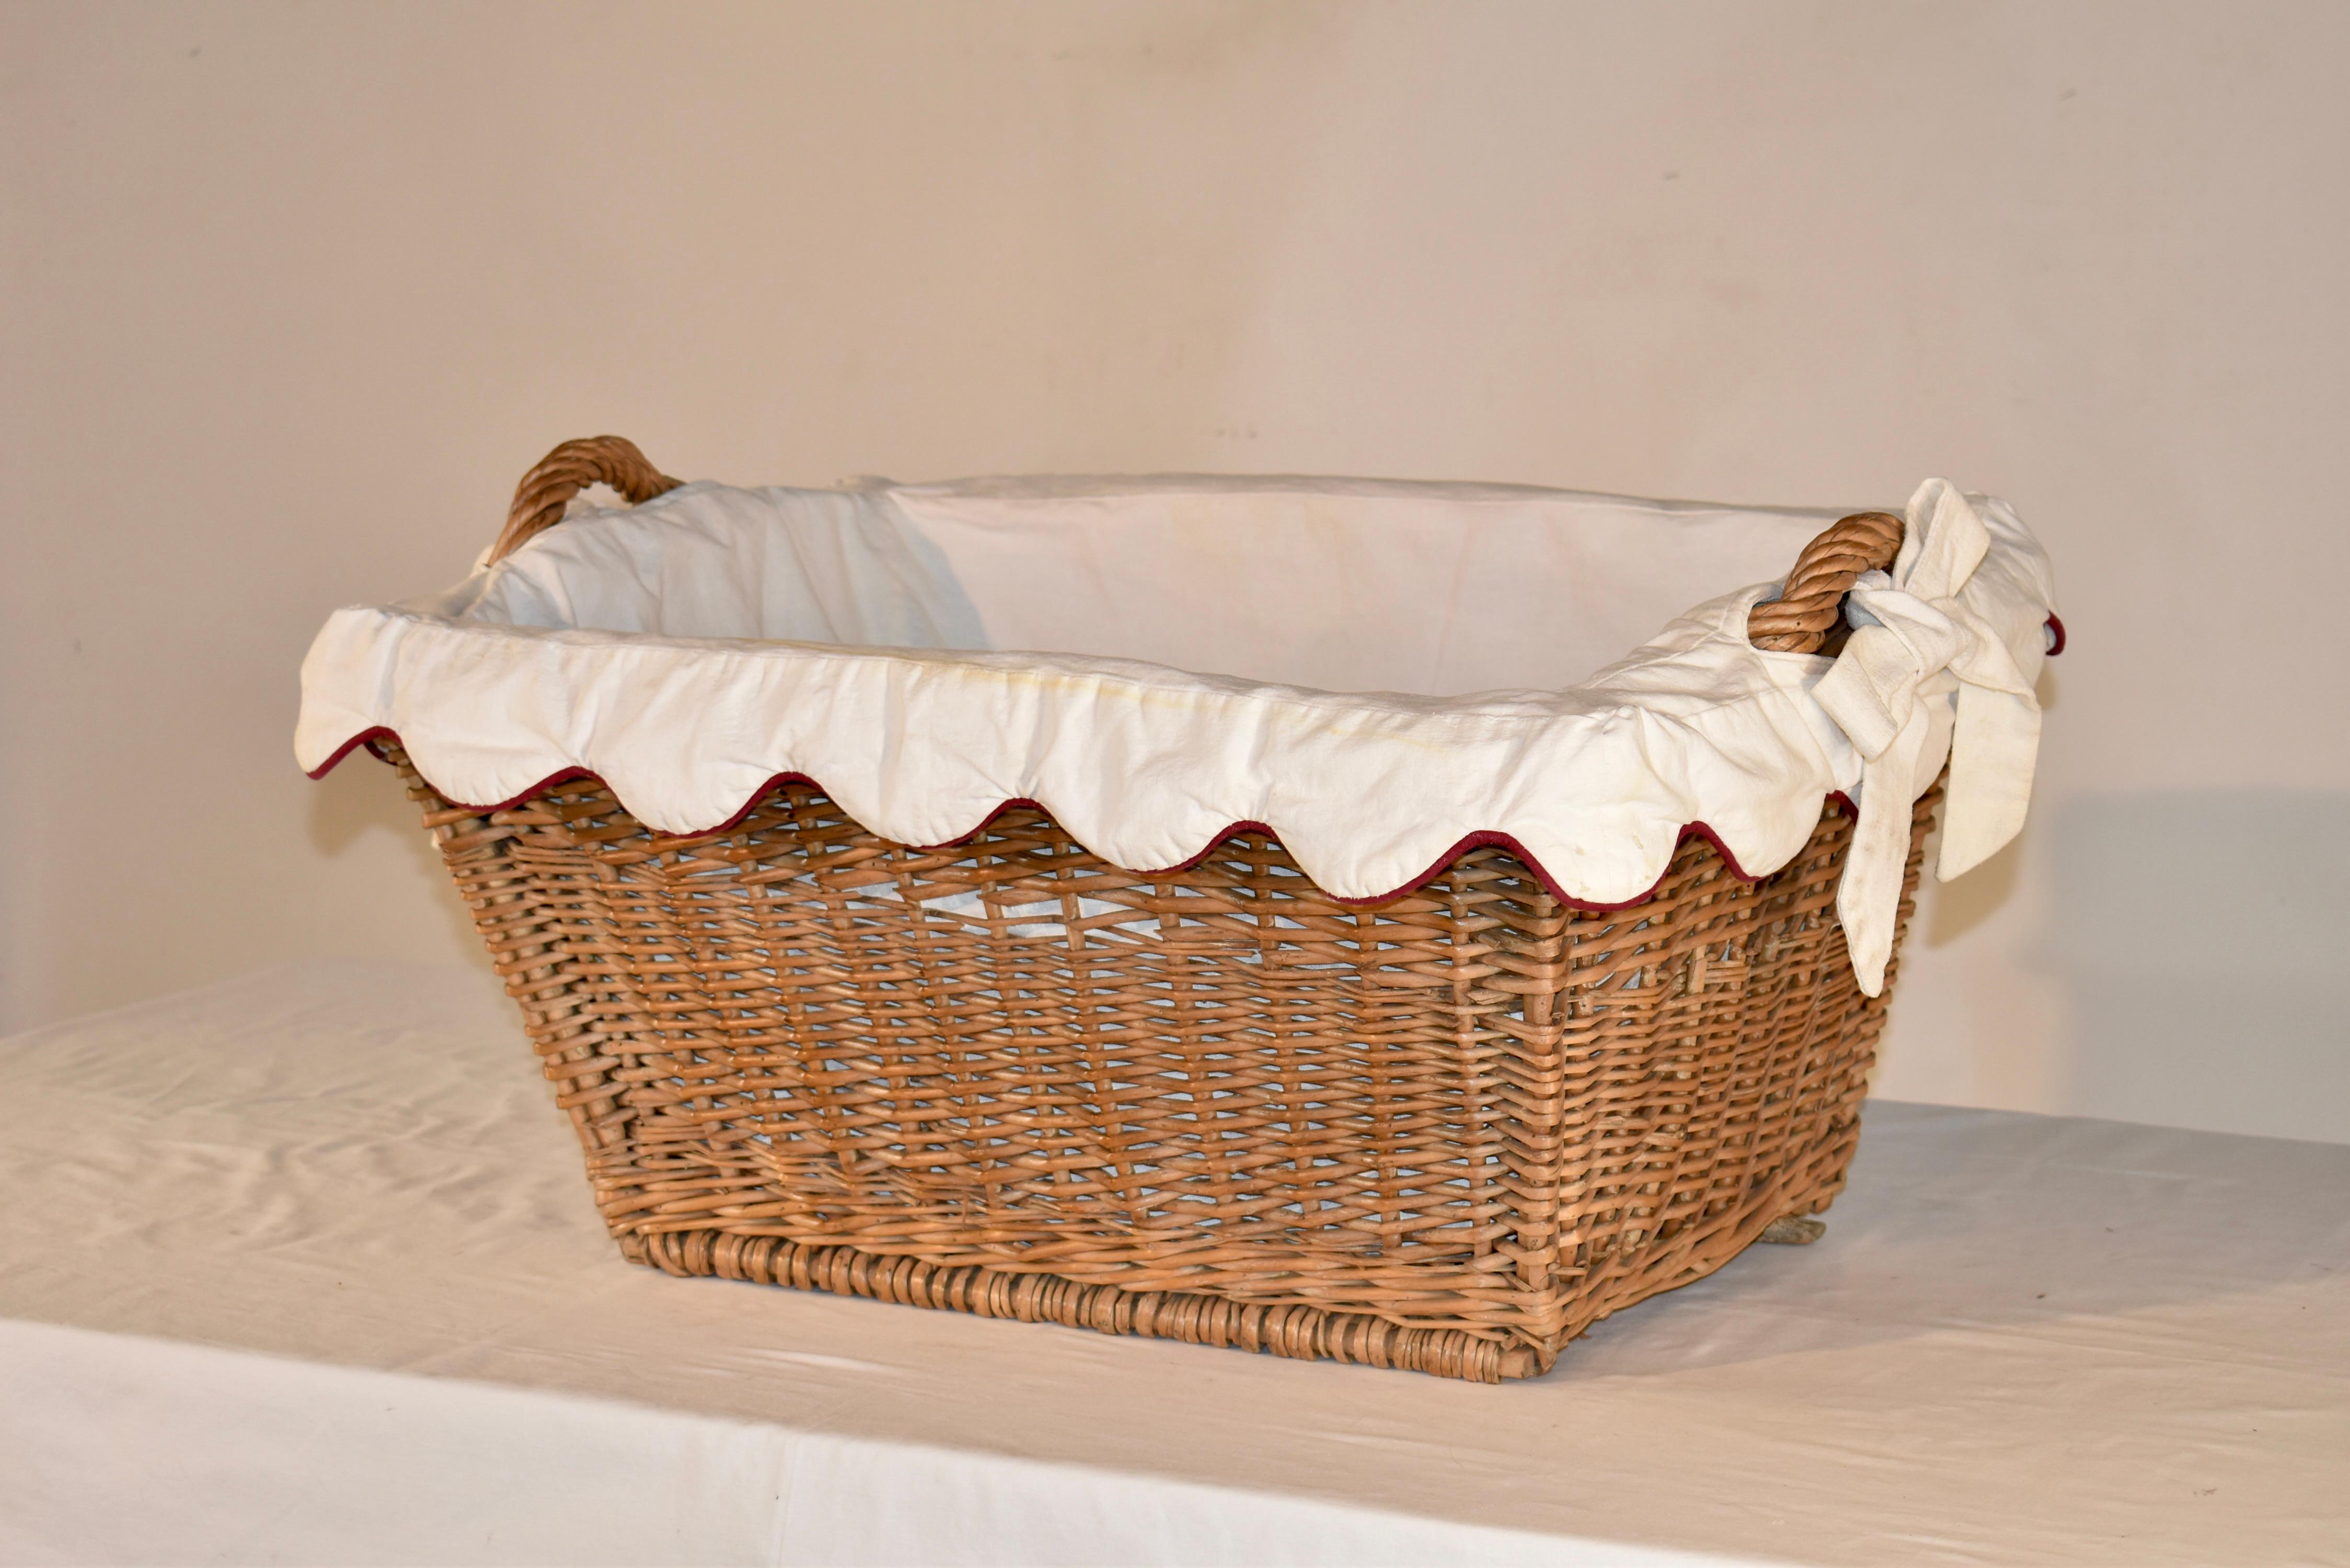 Circa 1920 French Laundry Basket In Good Condition For Sale In High Point, NC